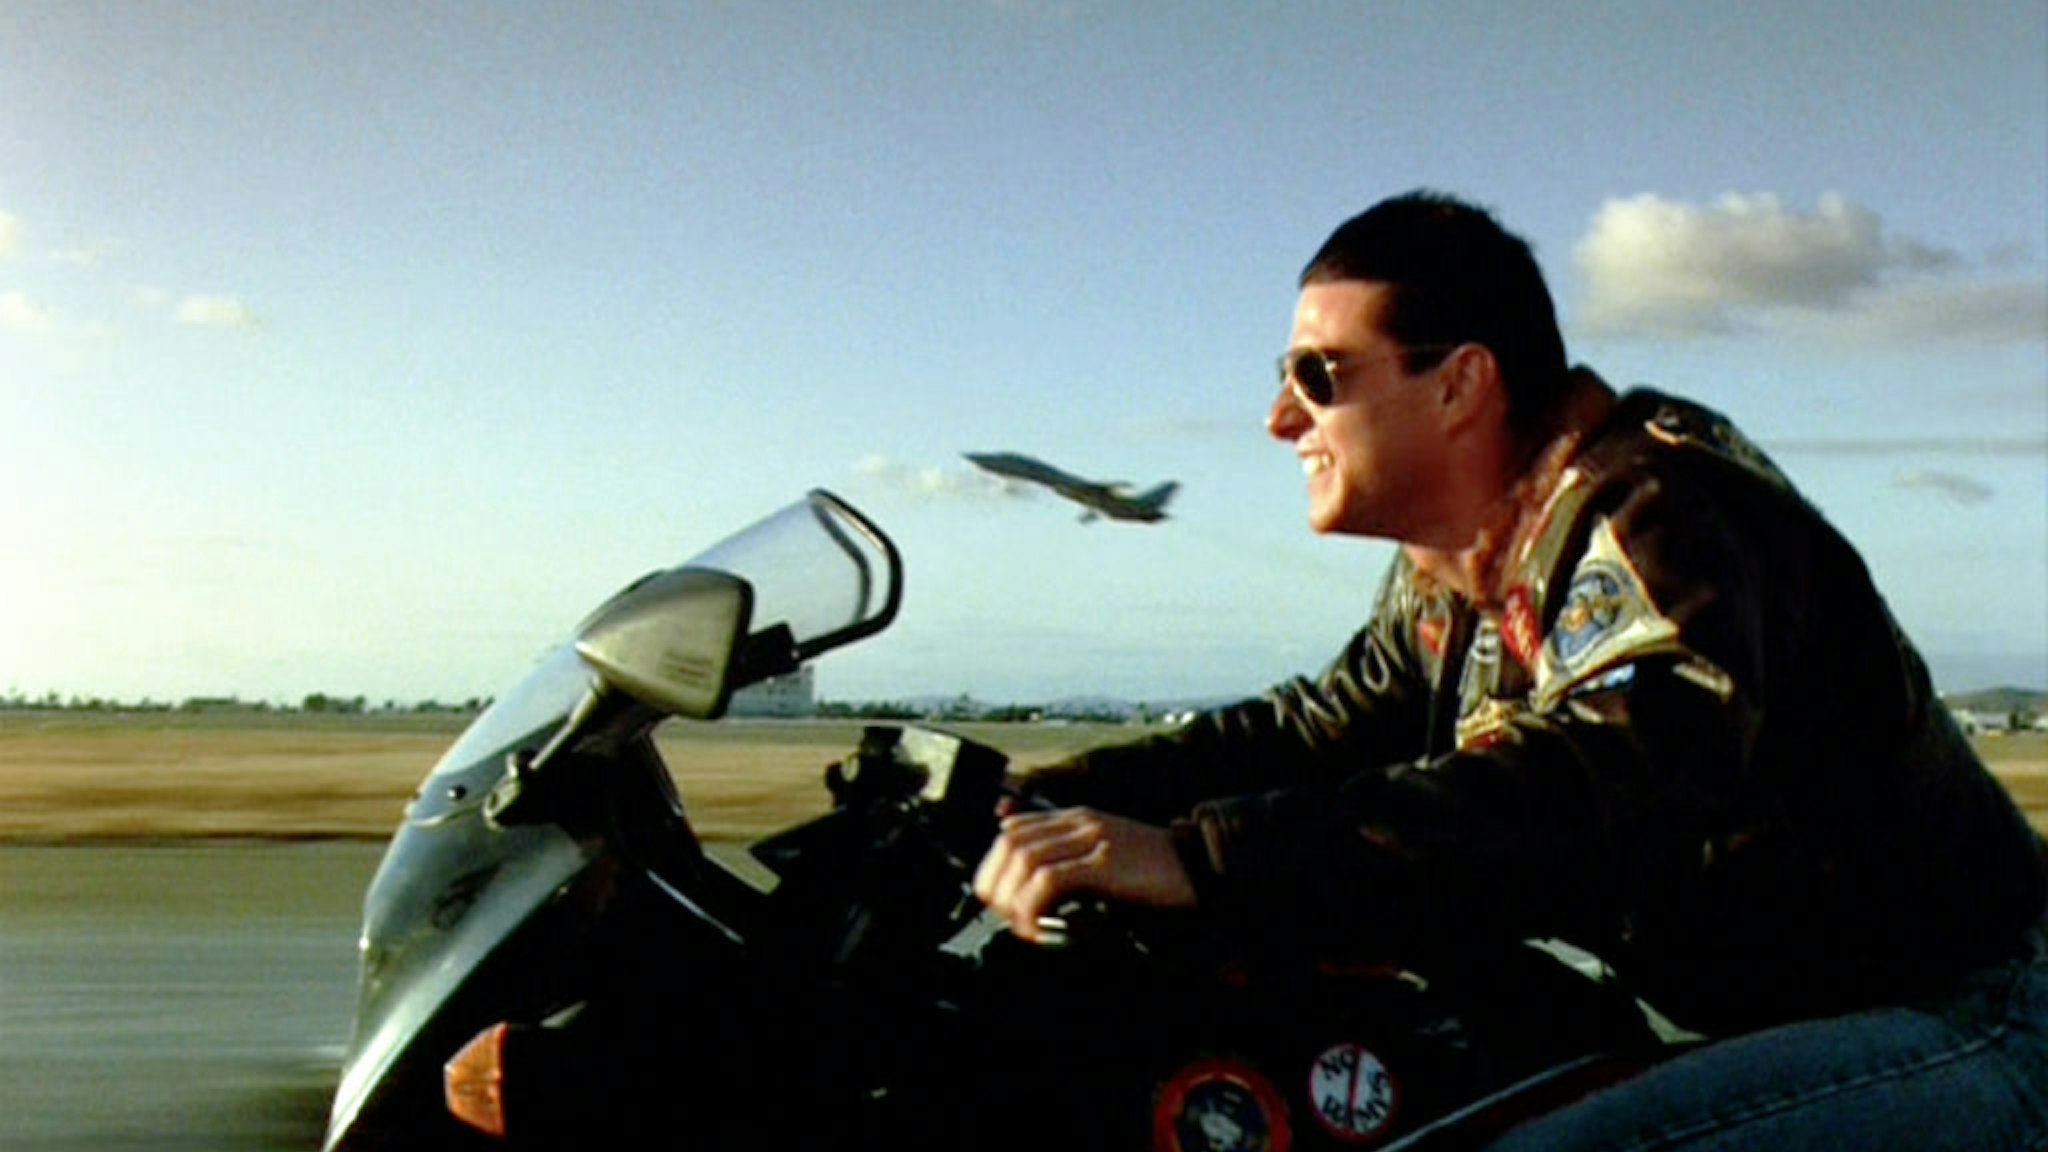 The movie "Top Gun", directed by Tony Scott.